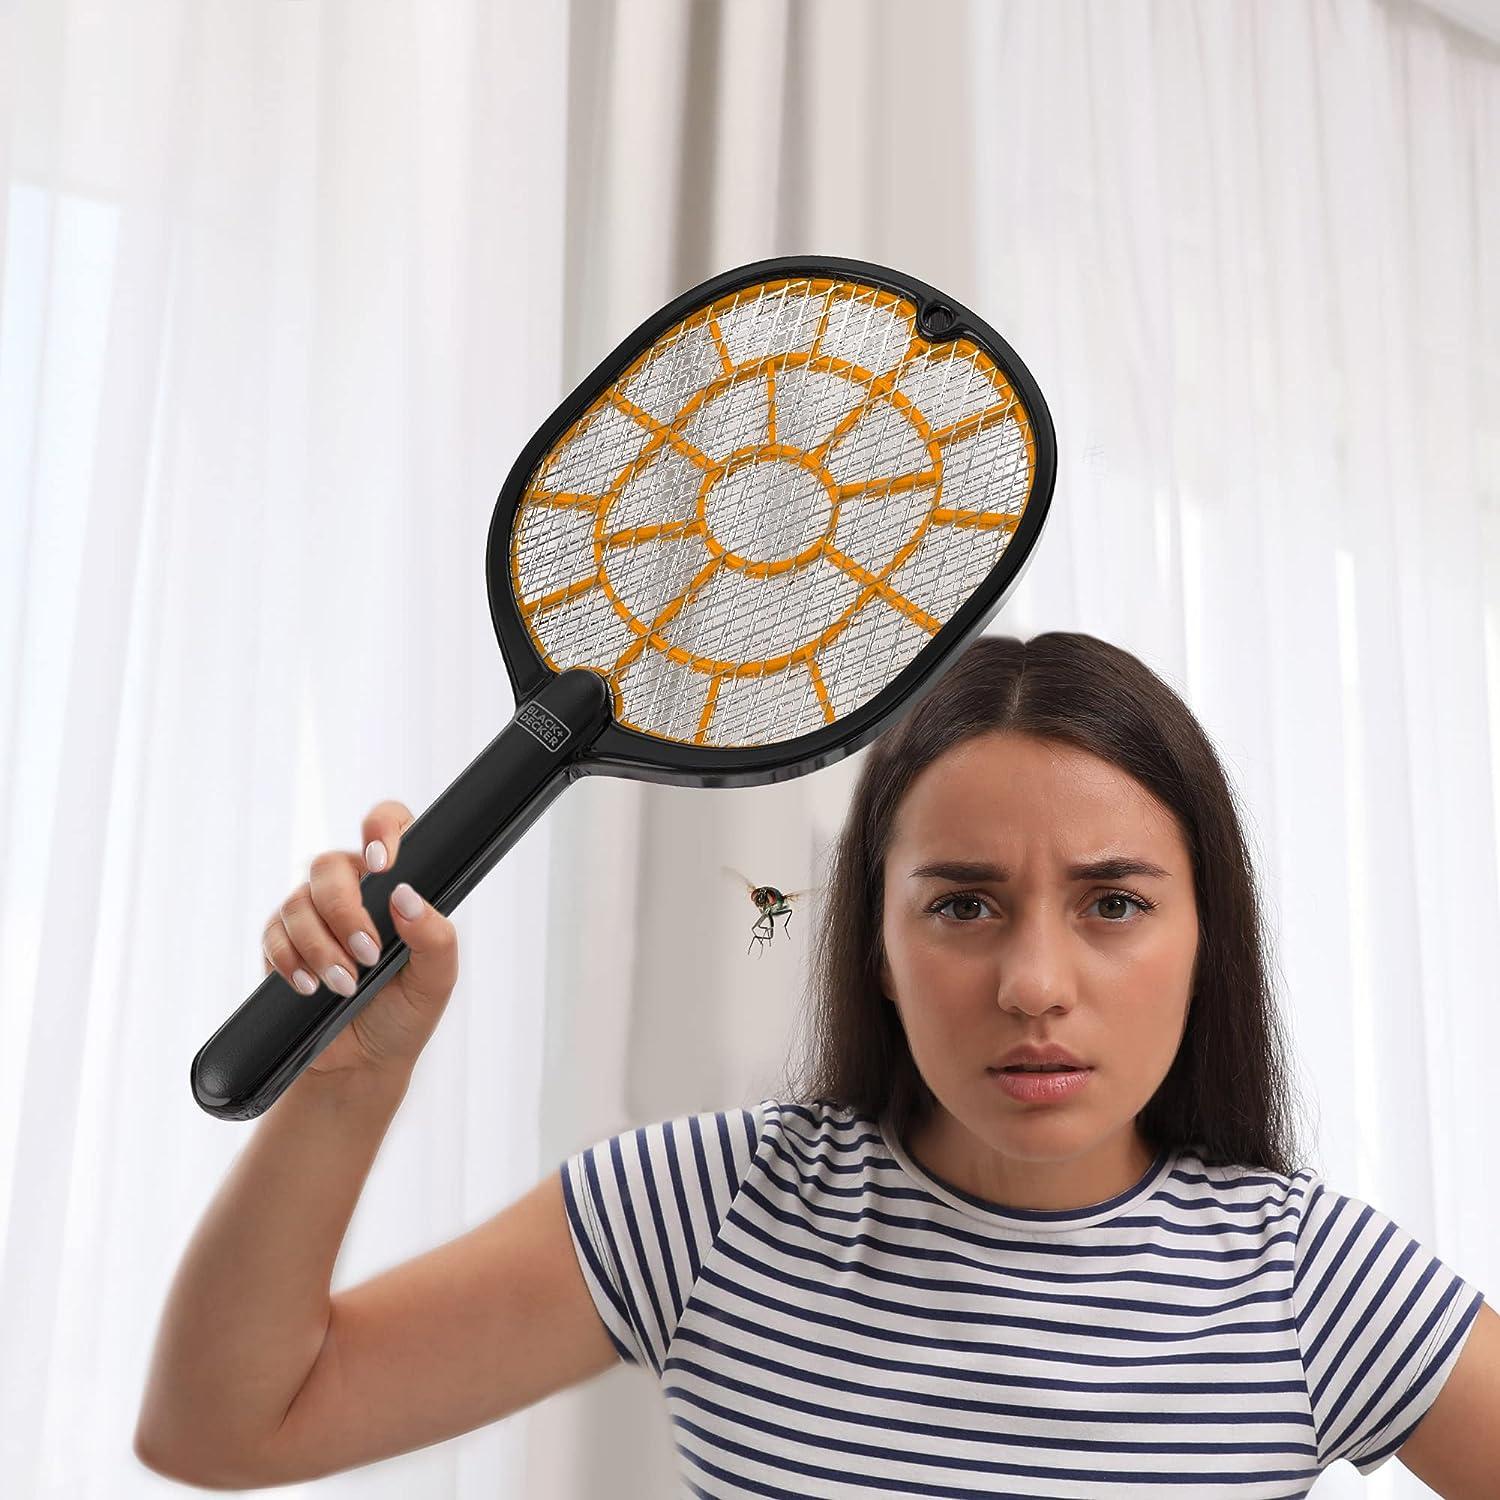 Black + Decker Electric Fly Swatter & Fly Zapper- Bug Zapper Racket Indoor  & Outdoor- Handheld, Heavy- Duty Mosquito Swatter, Battery- Powered, Non-  Toxic Safe for Humans & Pets Fly Swatters 